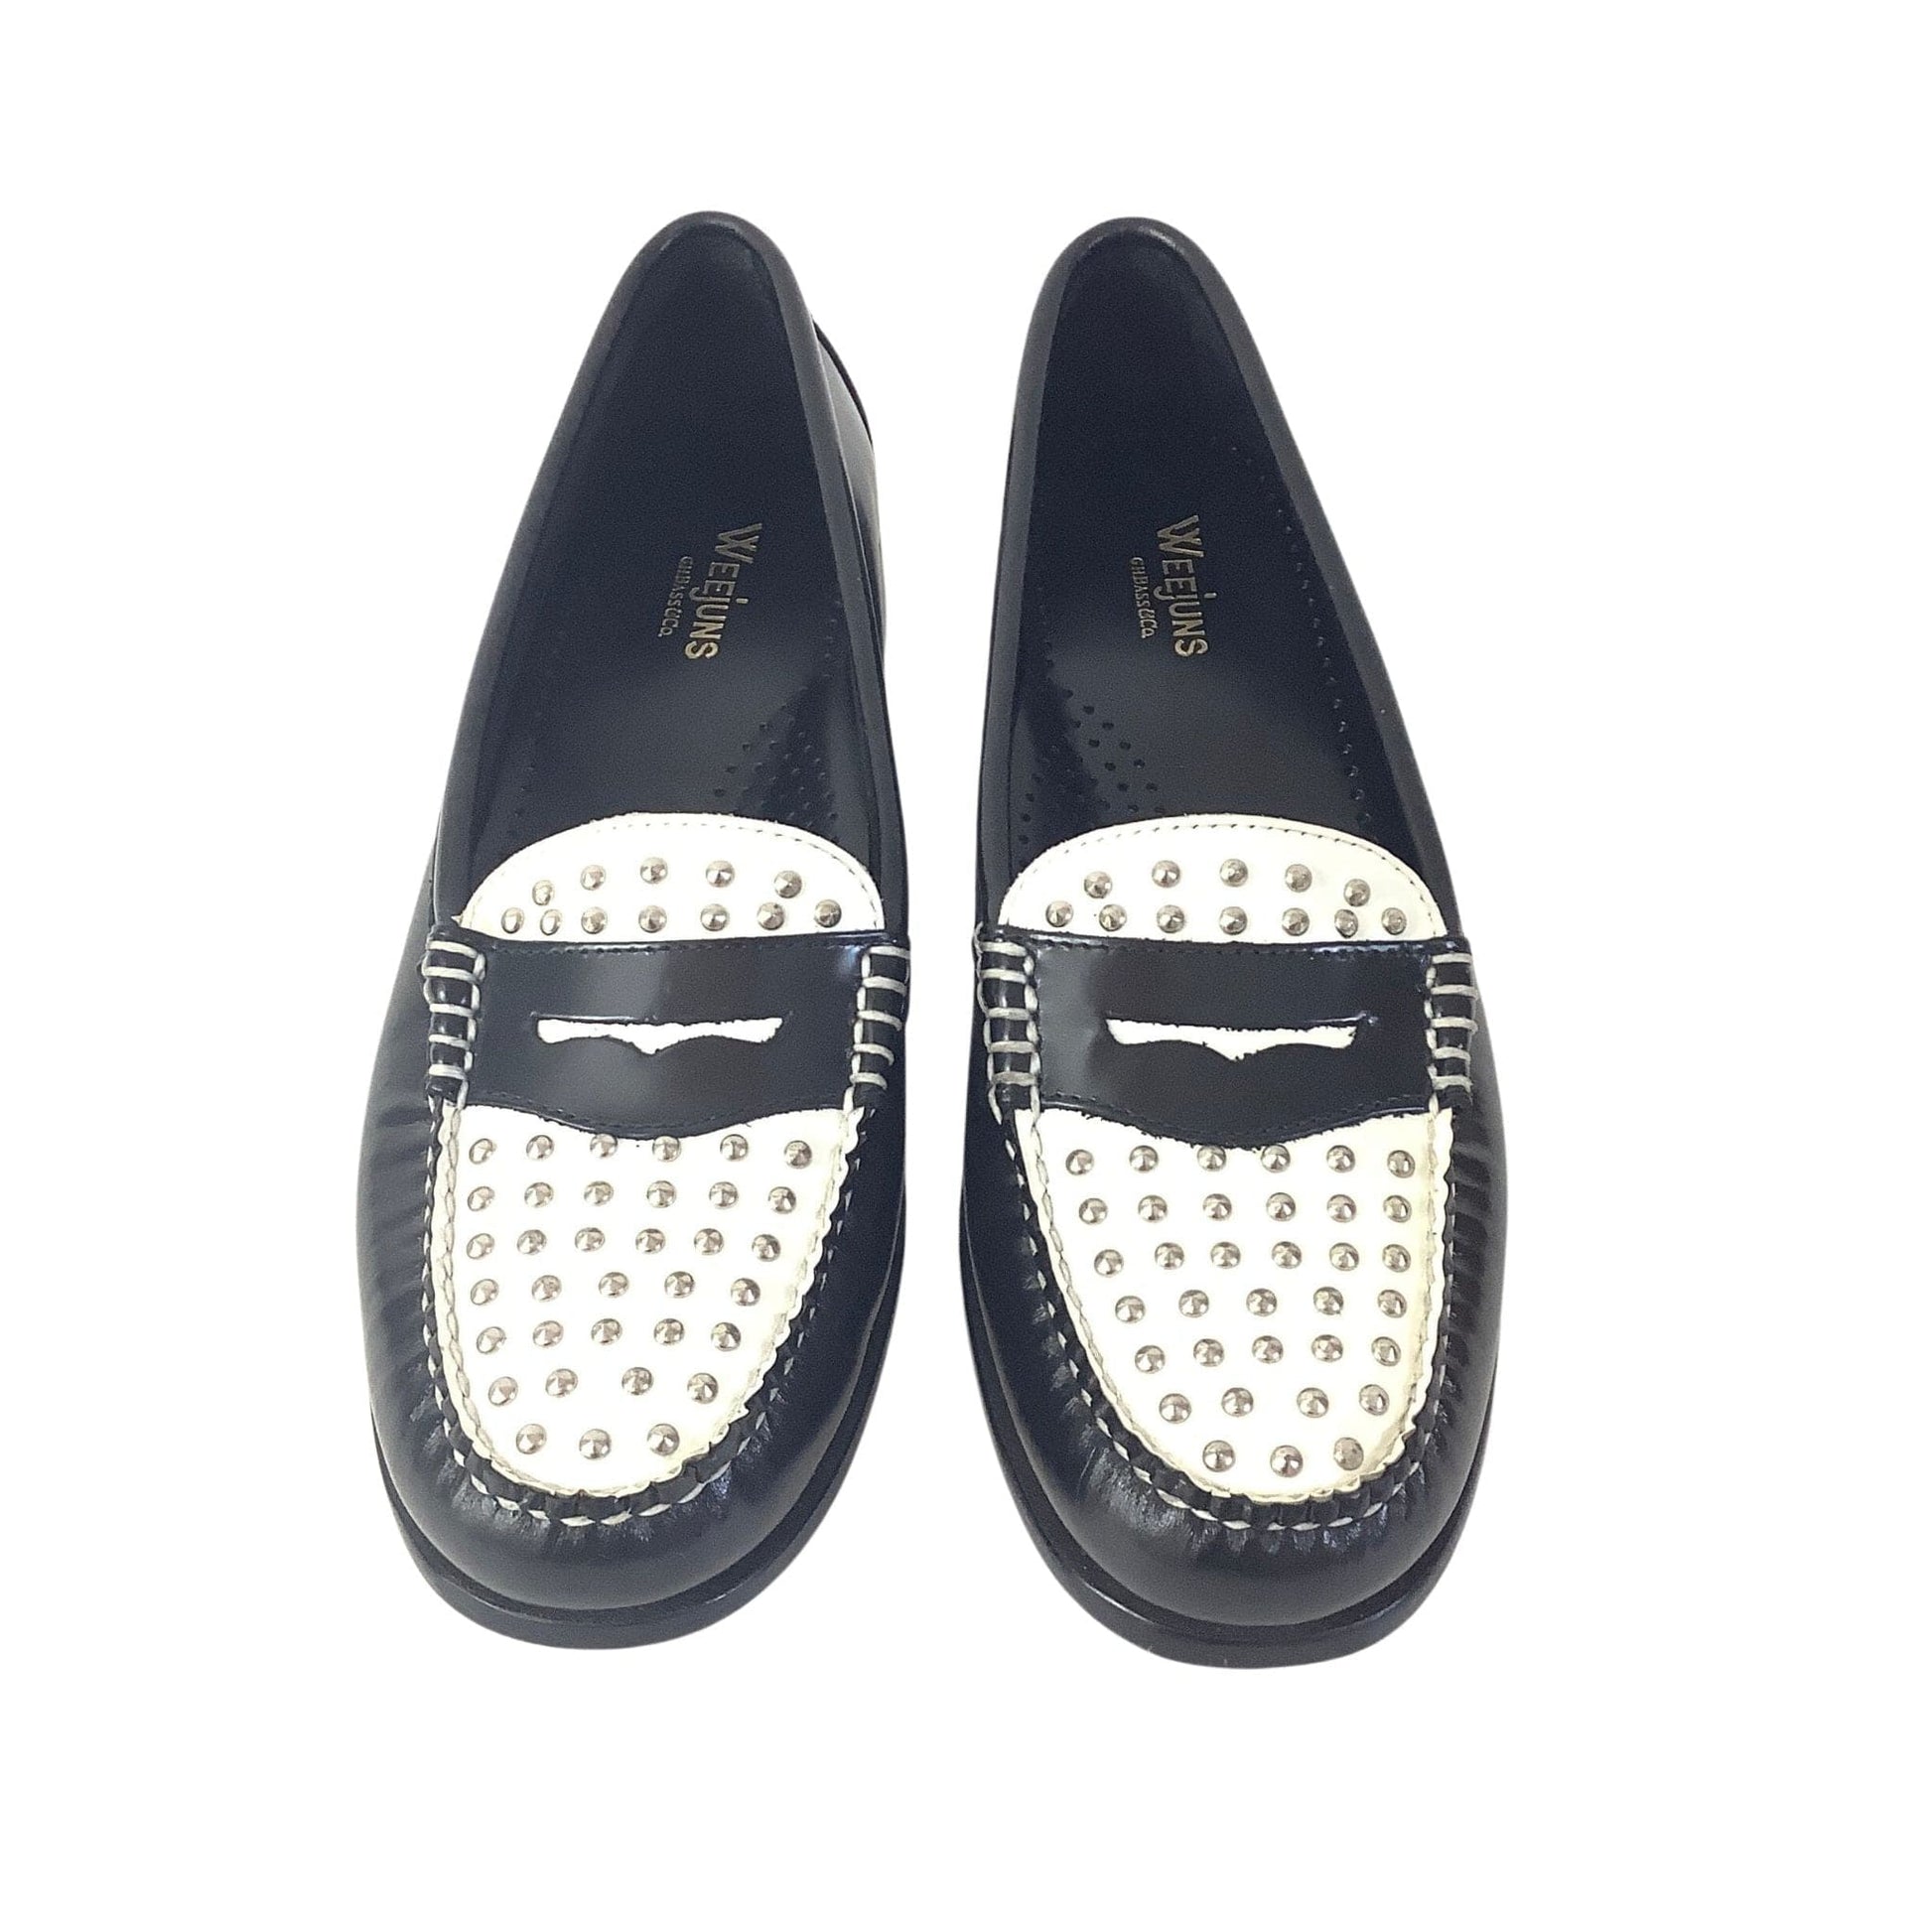 Studded Weejuns Loafers 7.5 / B&W / Y2K - Now